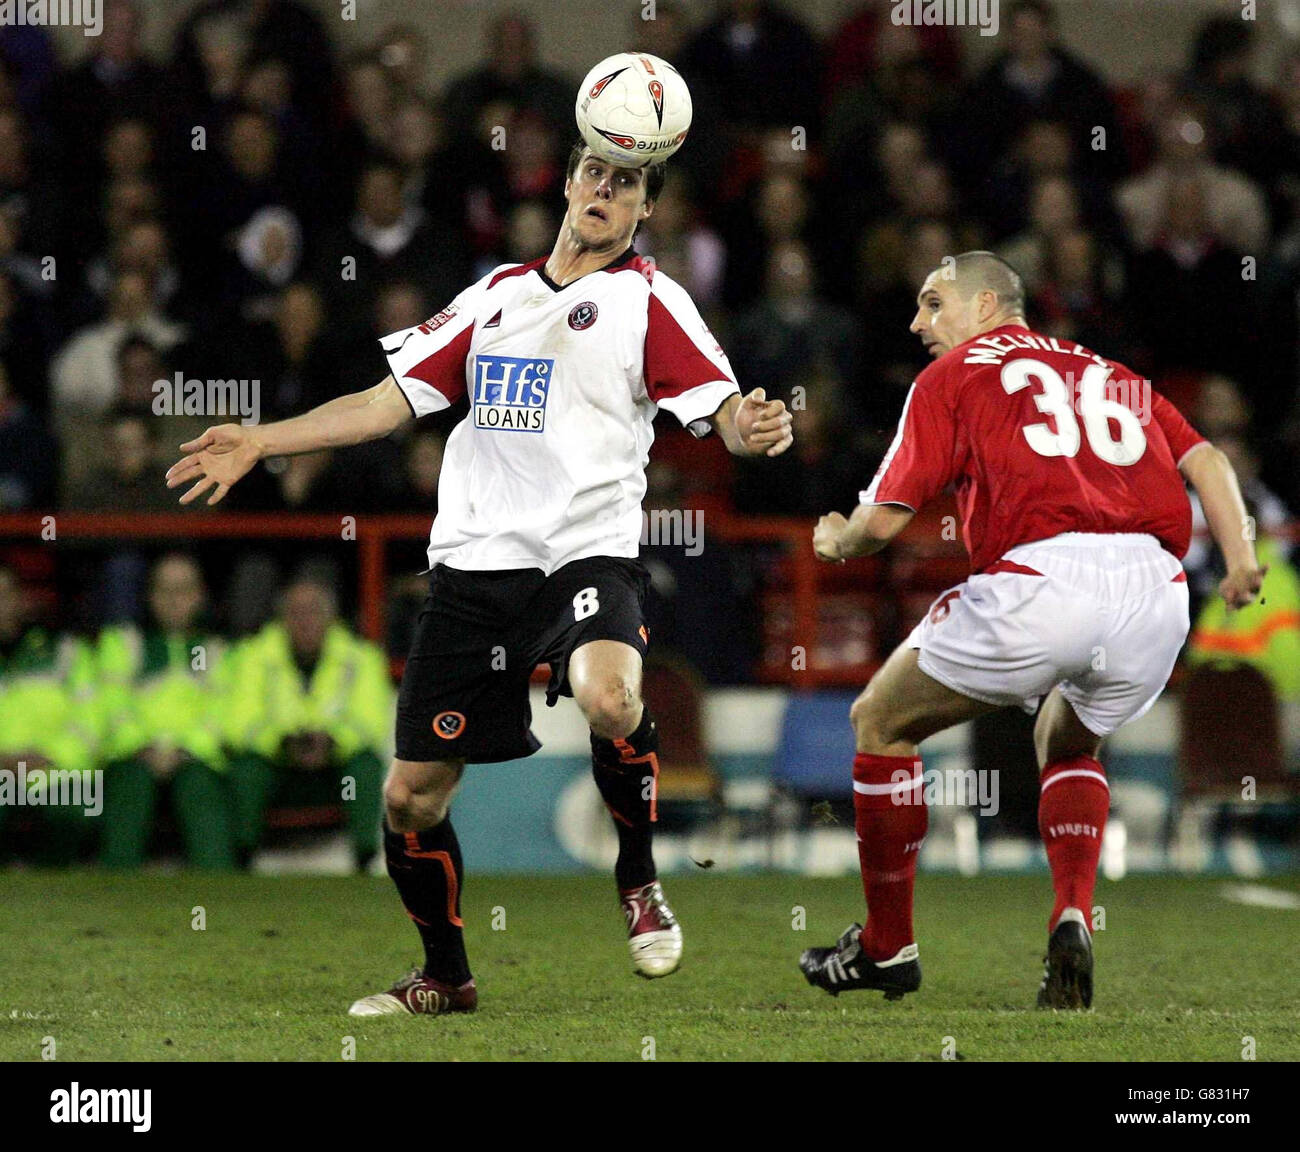 Soccer - Coca-Cola Football League Championship - Nottingham Forest v Sheffield United - City Ground. Sheffield United's Andy Gray (left) in action against Nottingham Forest's Andy Melville. Stock Photo